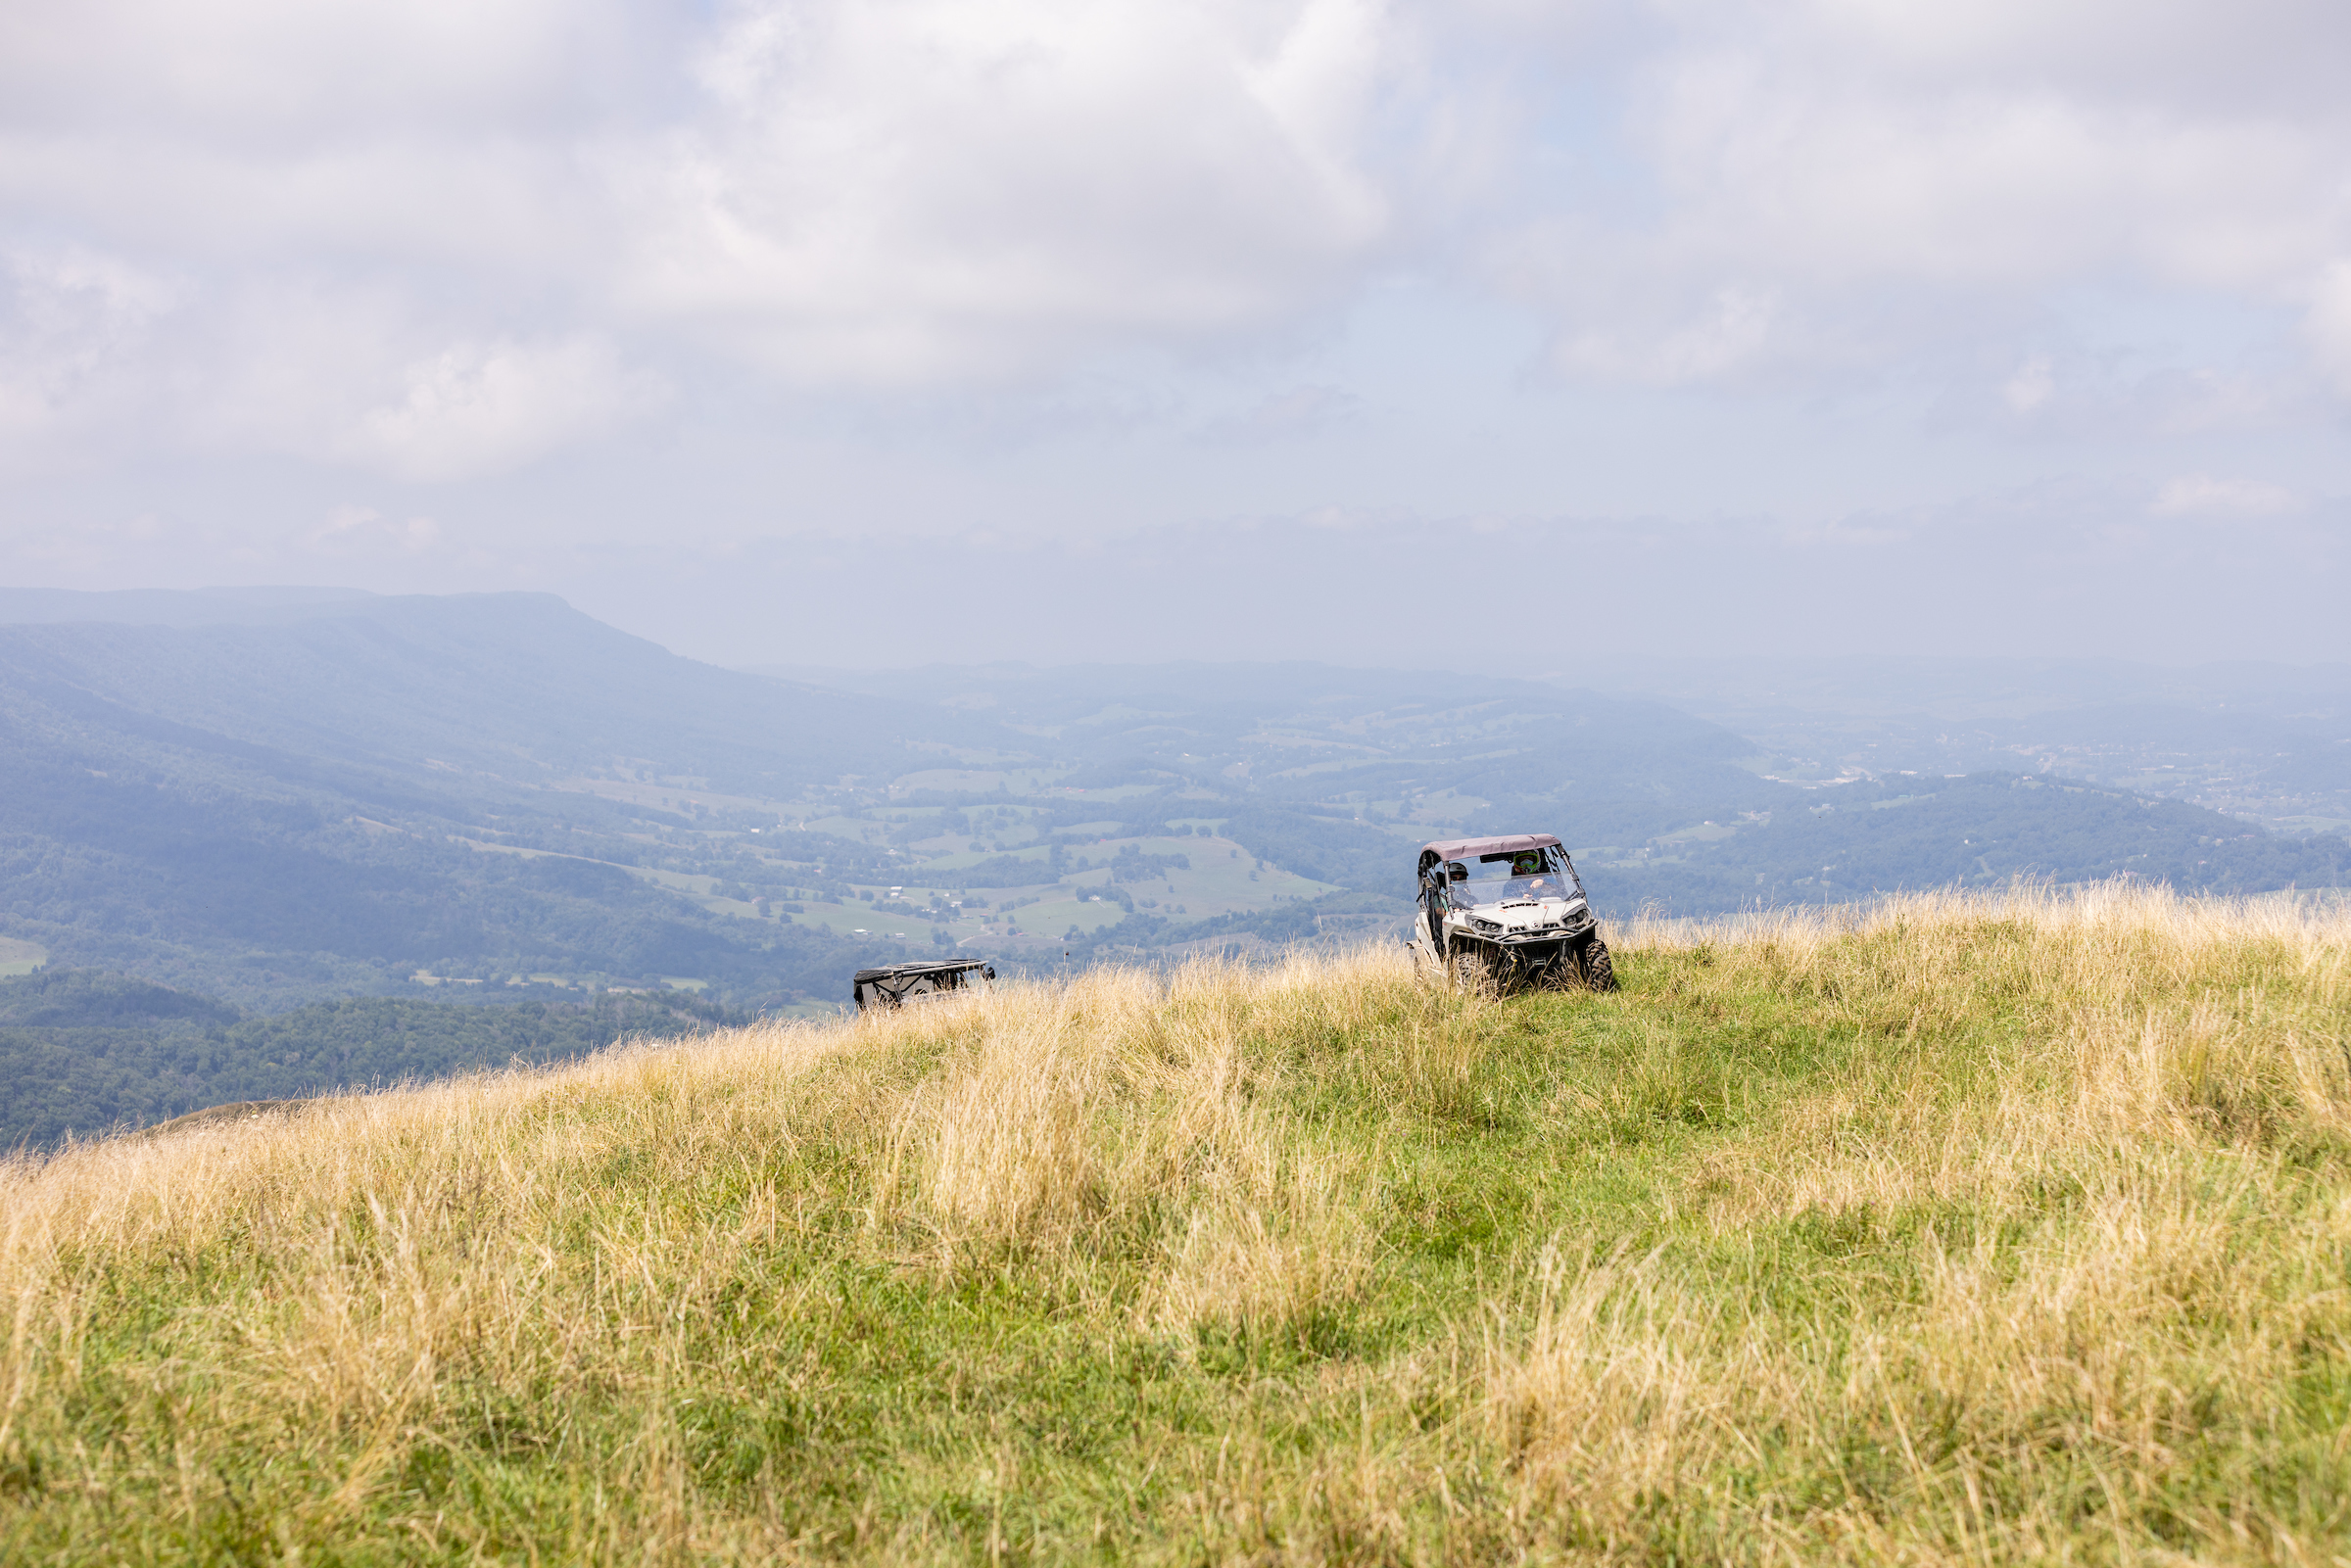 Two utility terrain vehicles crest the rise of one of the ridges on Beartown Mountain. A wide open valley spreads out below them.